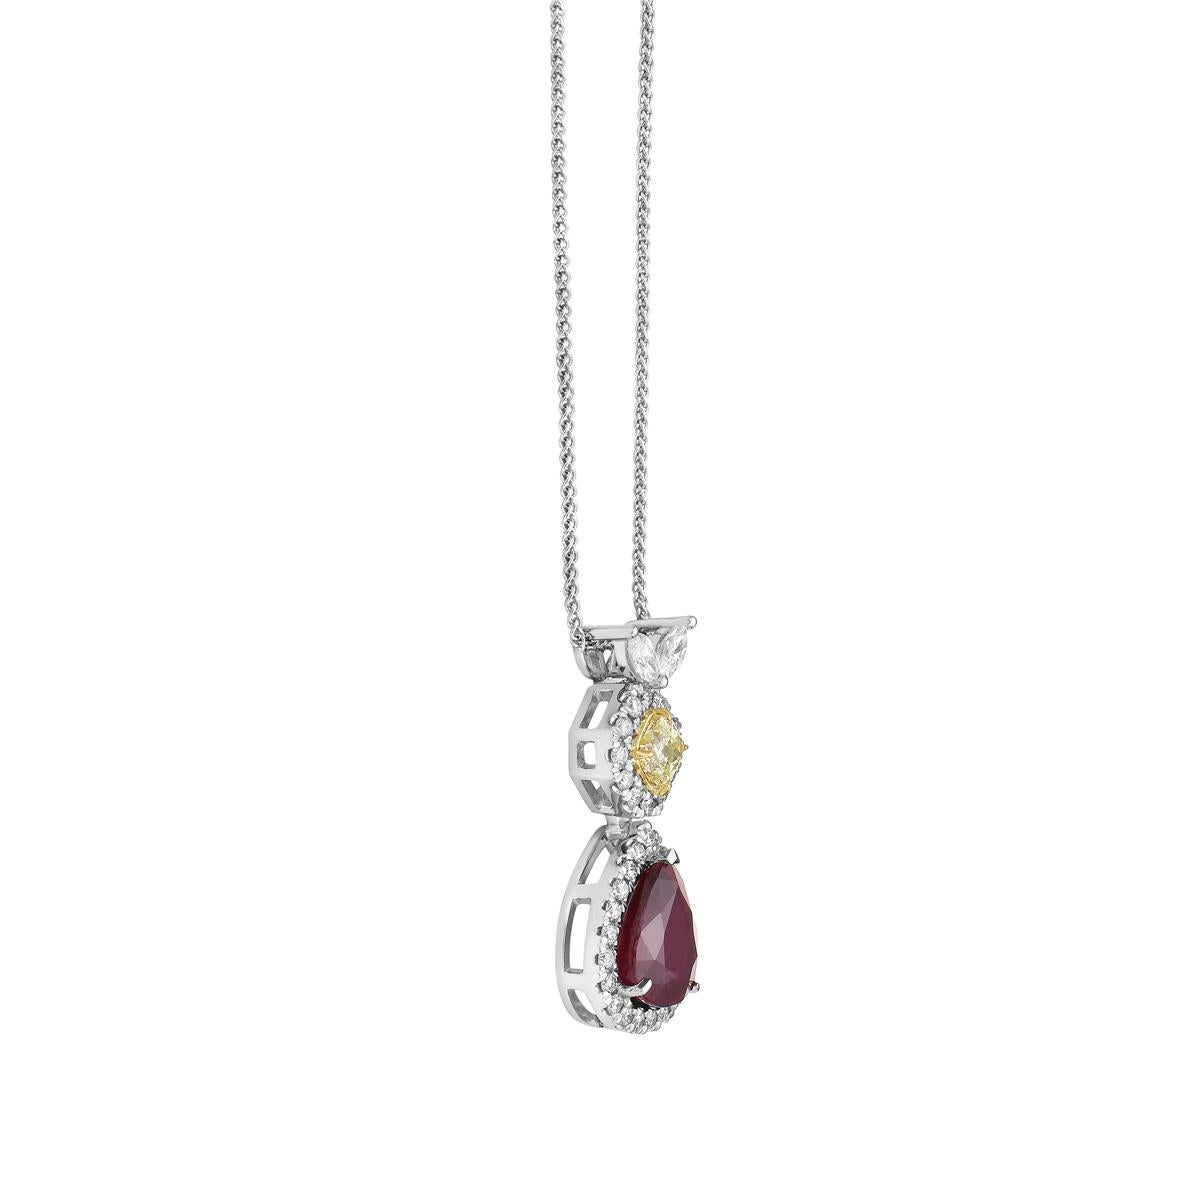 With this exquisite yellow diamond and ruby pendant, style and glamour are in the spotlight. This 18-karat yellow diamond and ruby pendant is made from 2.3 grams of gold. This pendant is adorned with VS2, G color diamonds, made out of 33 round